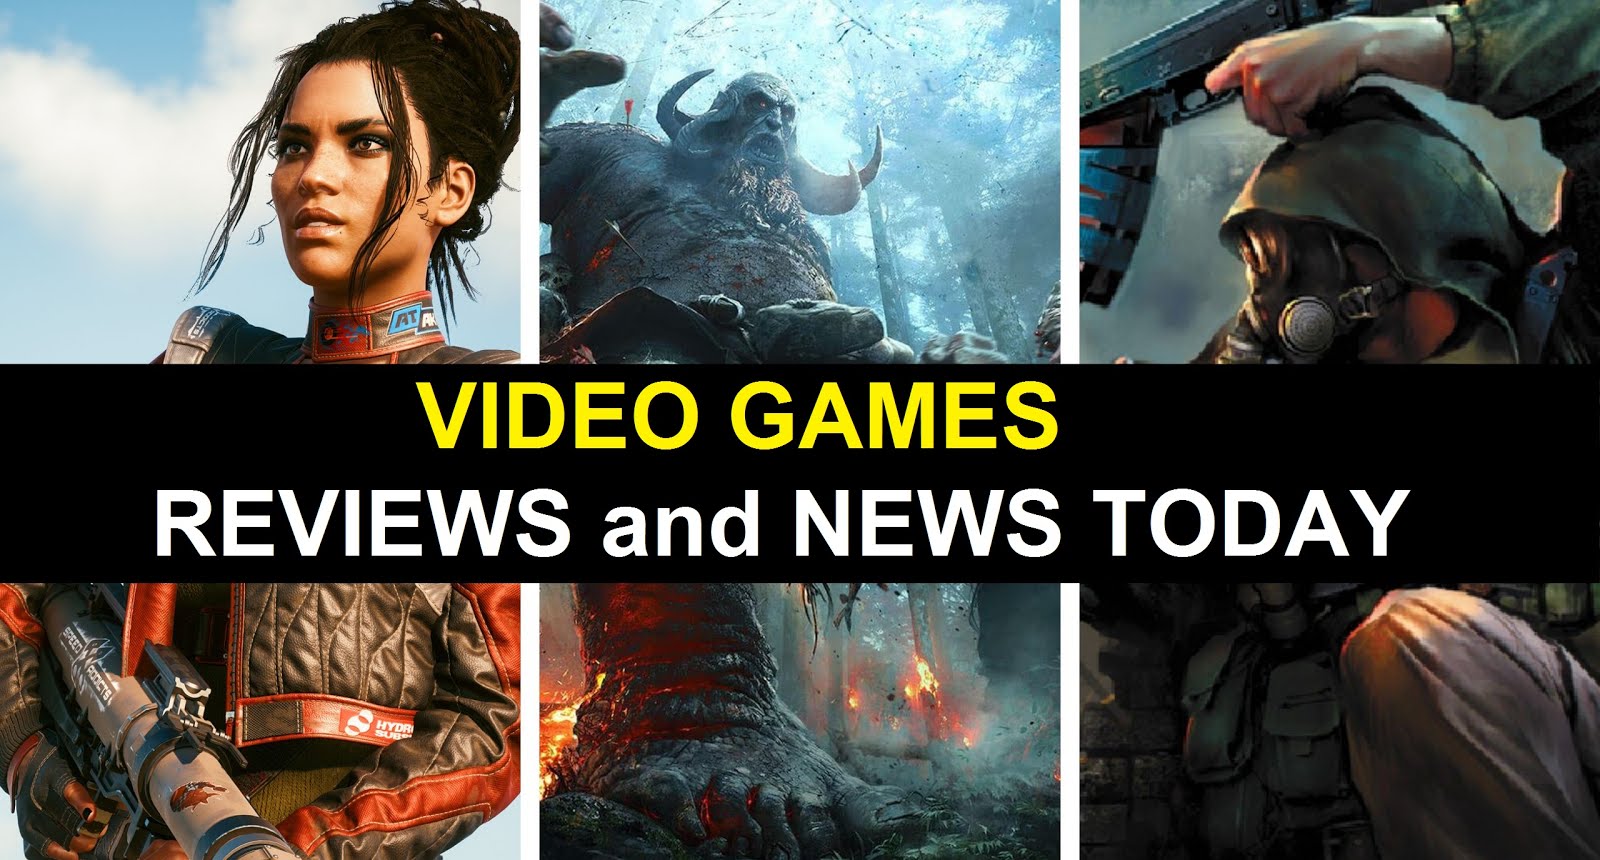 Video Games Reviews and News Today